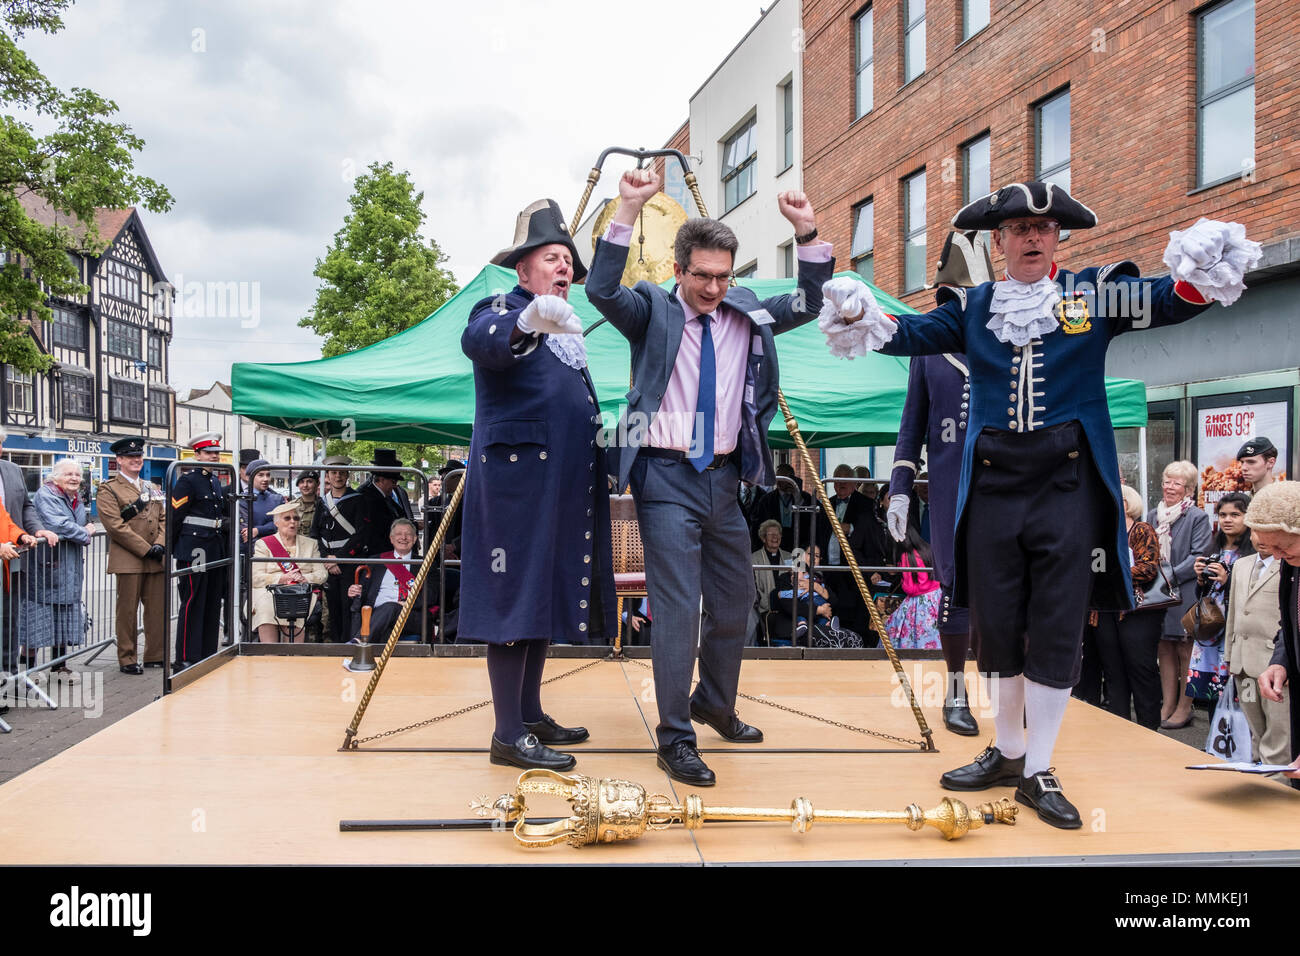 Saturday May 12th 2018. High Wycombe, Buckinghamshire, England, GB, UK. The quaint local tradition of 'Weighing in the Mayor' took place in the town centre today.  Traditionally, the outgoing and incoming mayor and civic officials are weighed at the beginning of the mayor's term of office each year to ascertain if they have gained weight at the expense of the taxpayer. The current Member of Parliament for the town, Mr Steve Baker MP, was adjudged to have gained weight and thus heartily booed by the crowd. Credit: D. Callcut/Alamy Live News Stock Photo